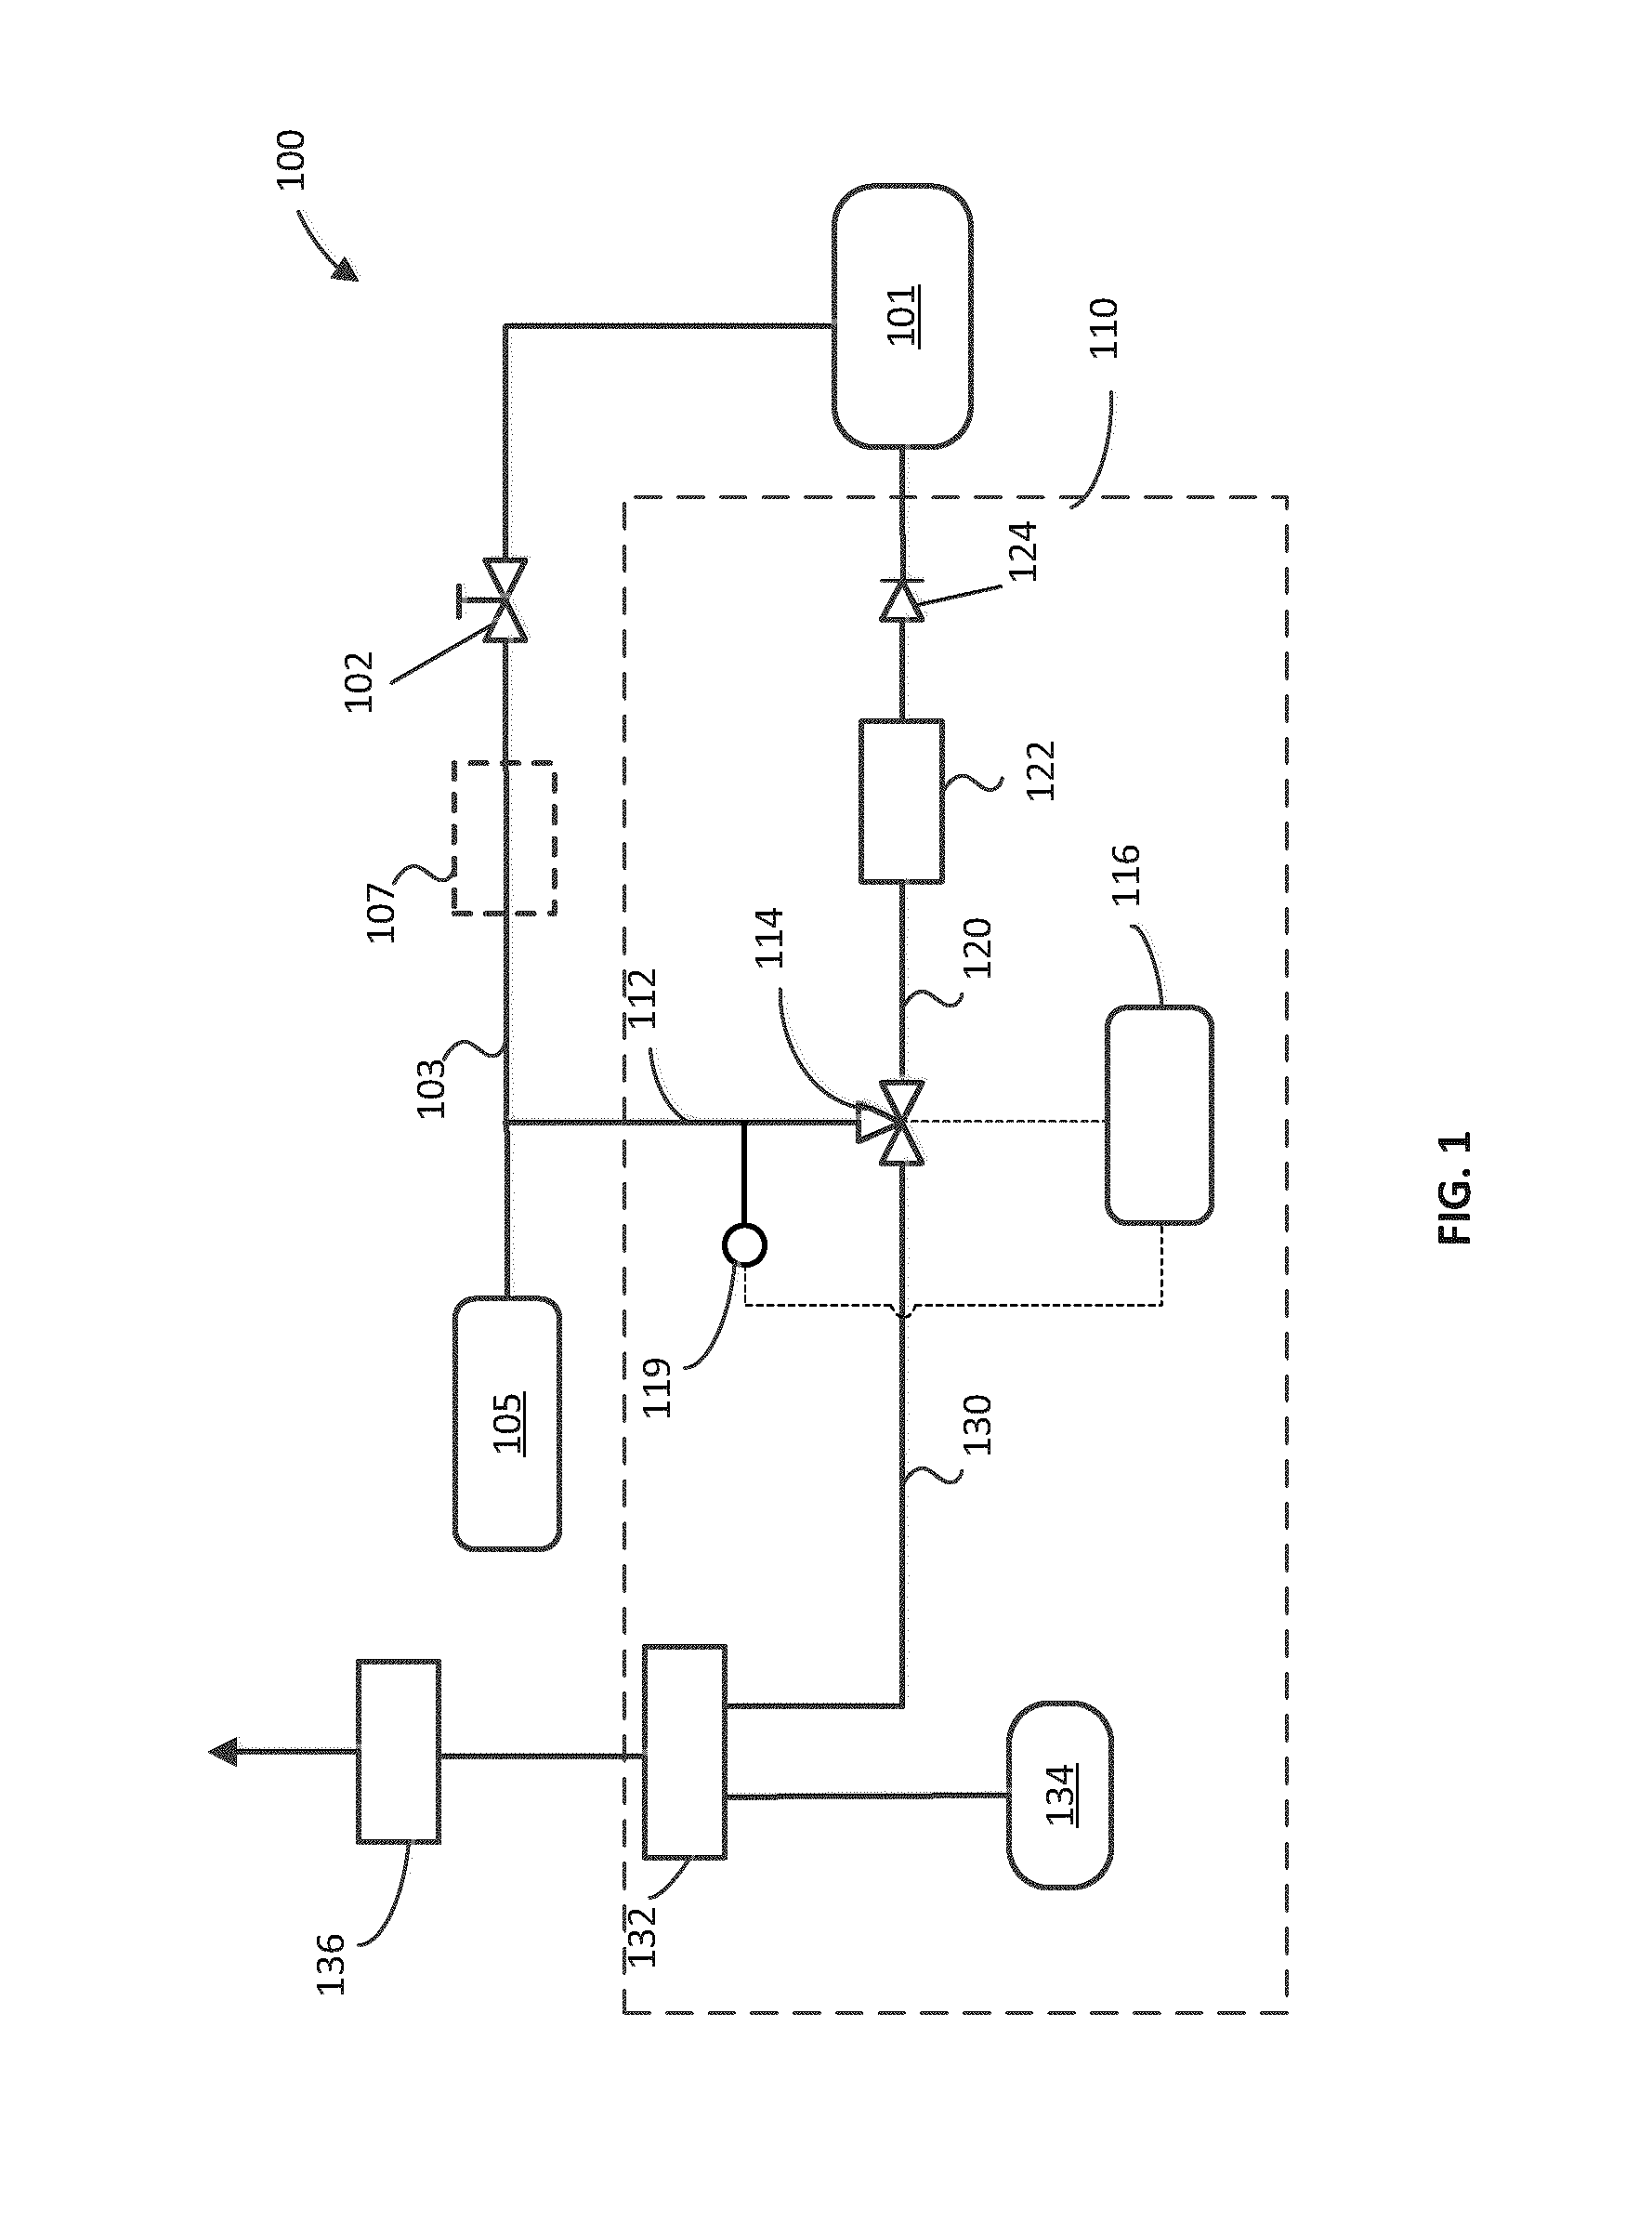 System and method for delivering a fluid stored in liquefied form to an end user in gaseous form